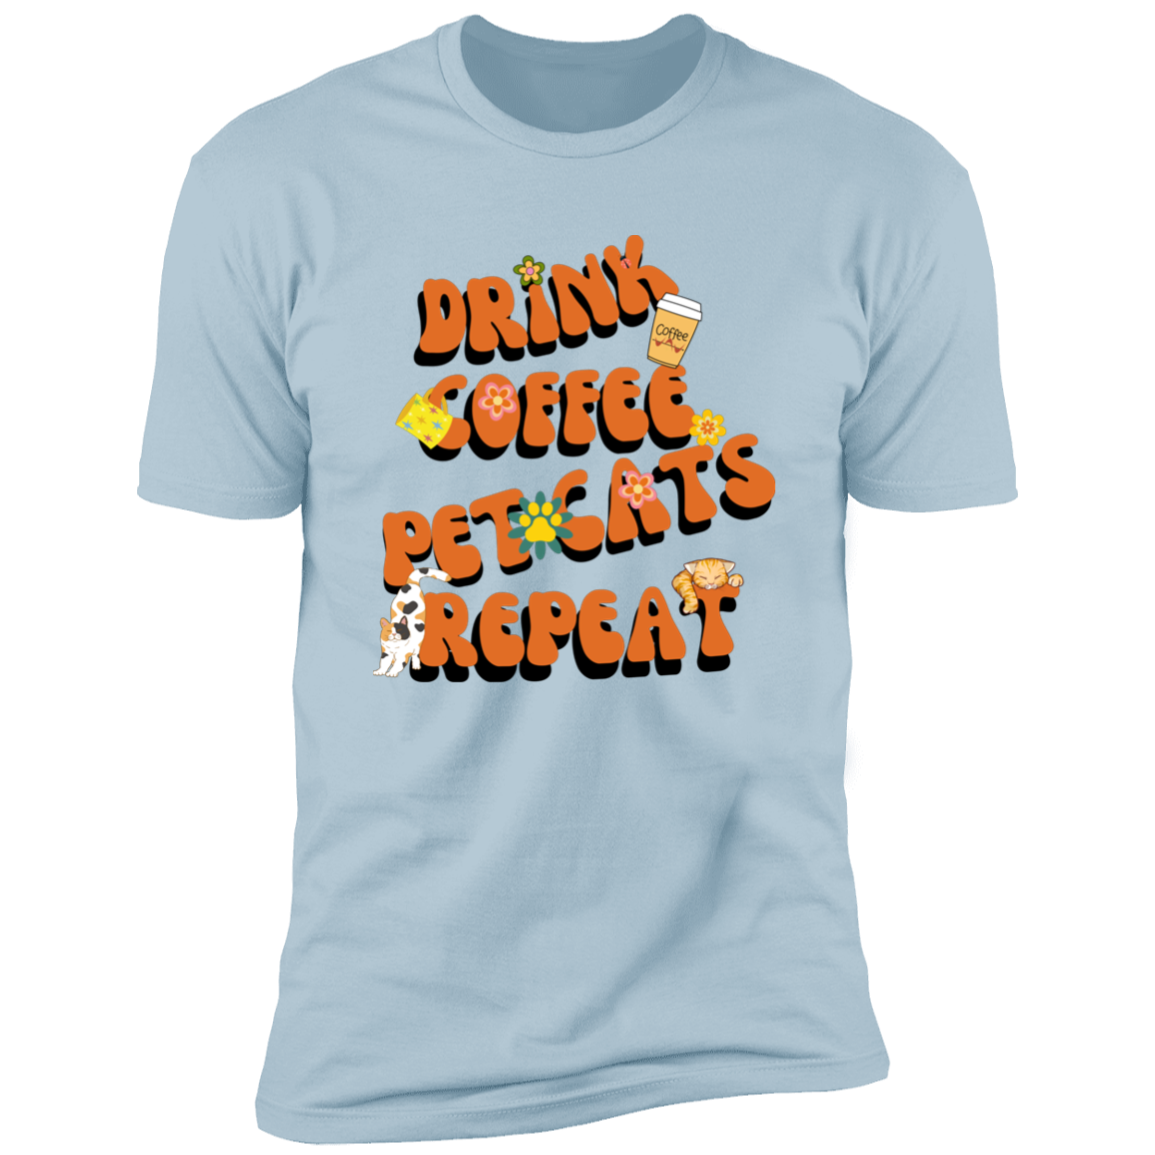 Drink Coffee Pet Cats Repeat T-shirt, Cat t-shirt for humans, in light blue